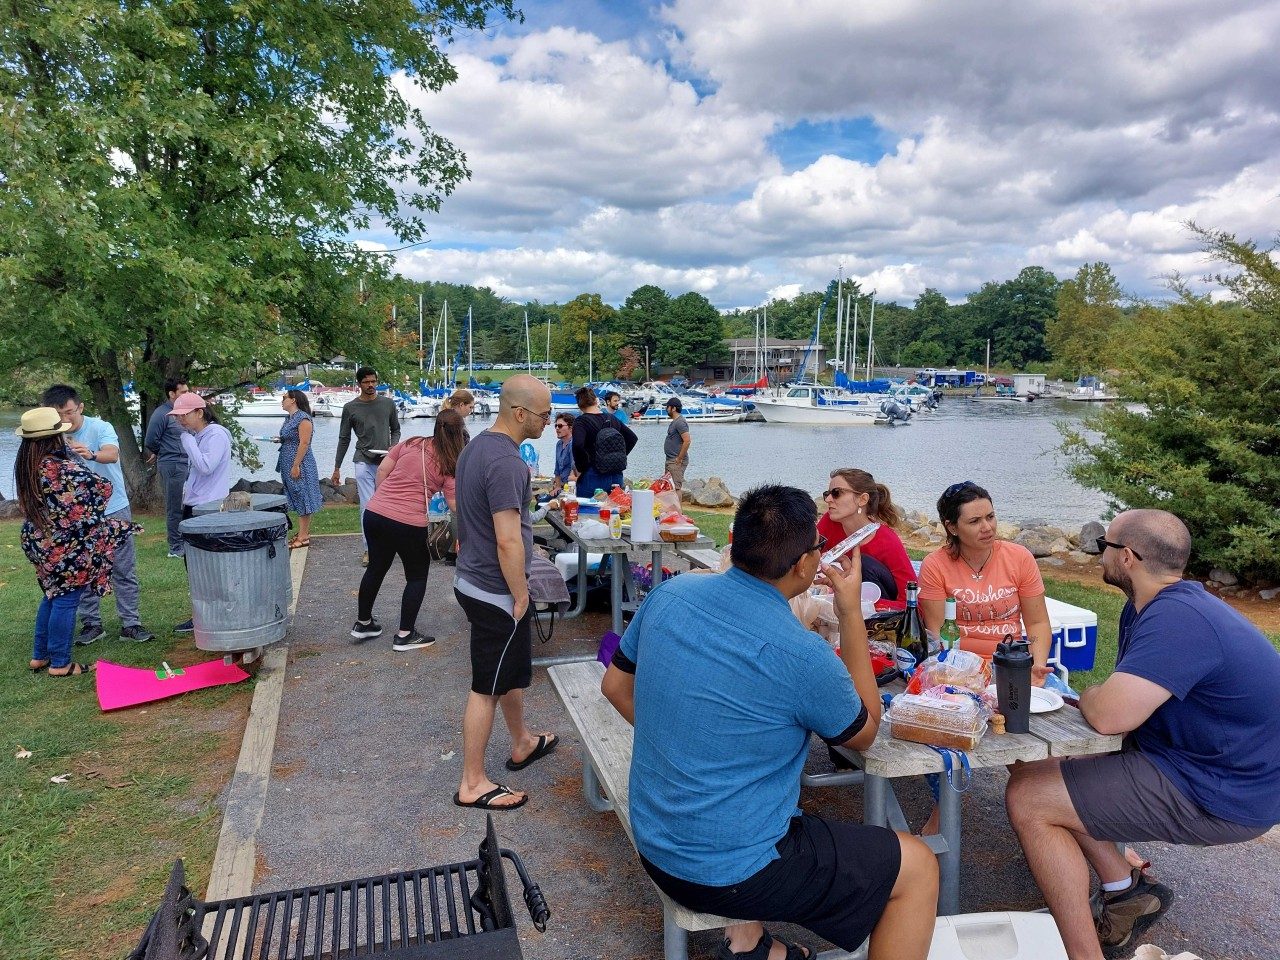 As part of National Postdoctoral Appreciation Week in 2021, the Virginia Tech  Postdoc Association held an outing and cookout at Claytor Lake State Park.